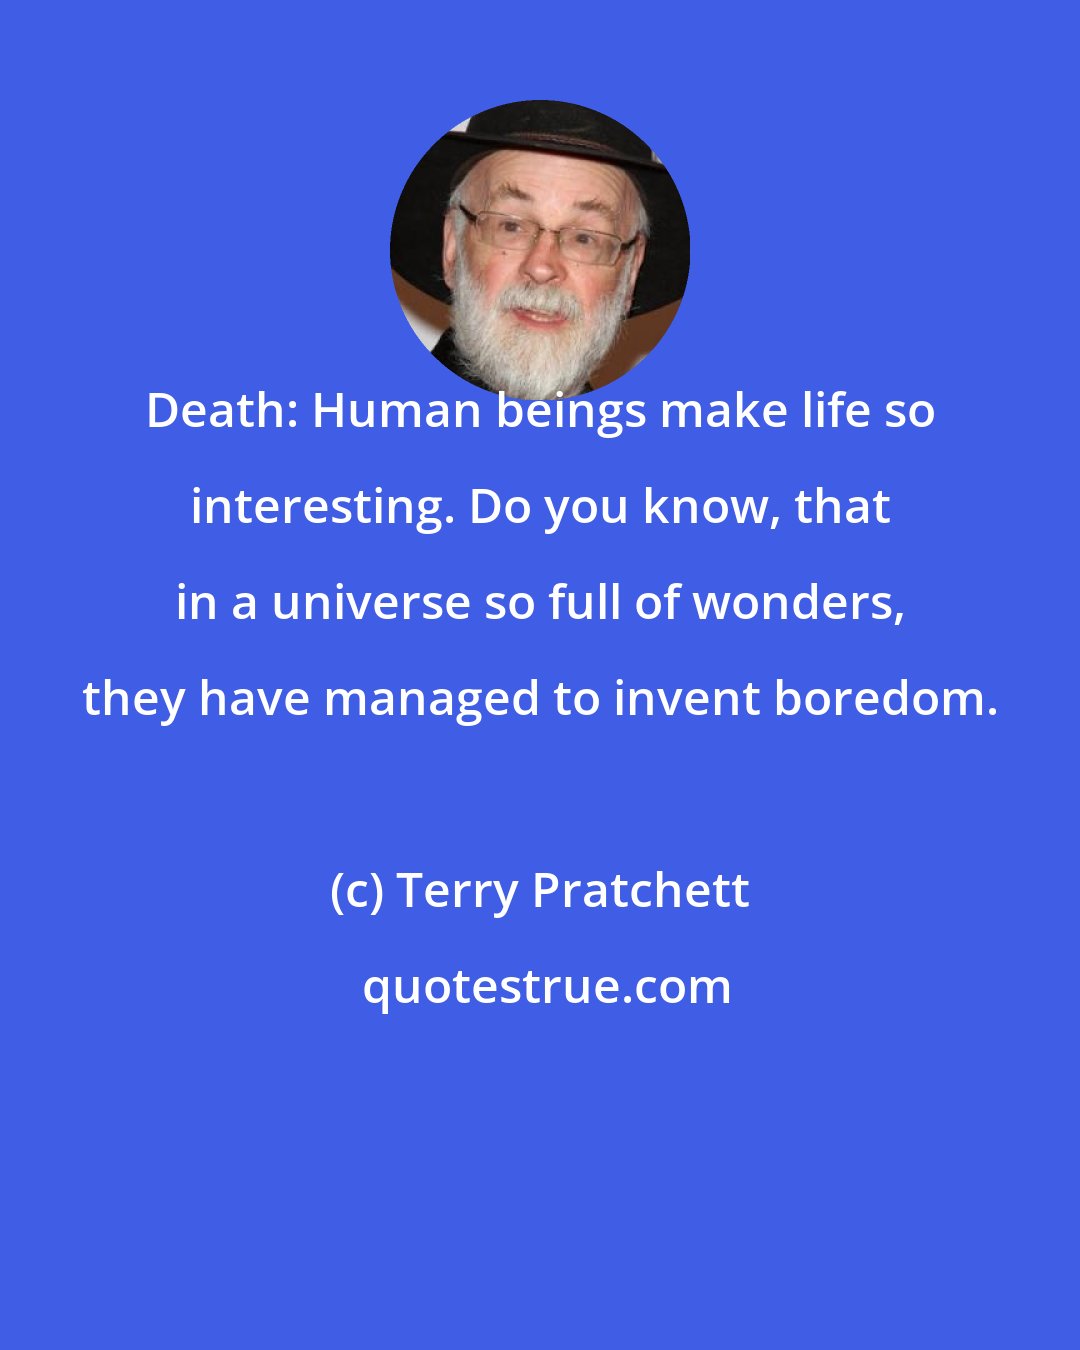 Terry Pratchett: Death: Human beings make life so interesting. Do you know, that in a universe so full of wonders, they have managed to invent boredom.